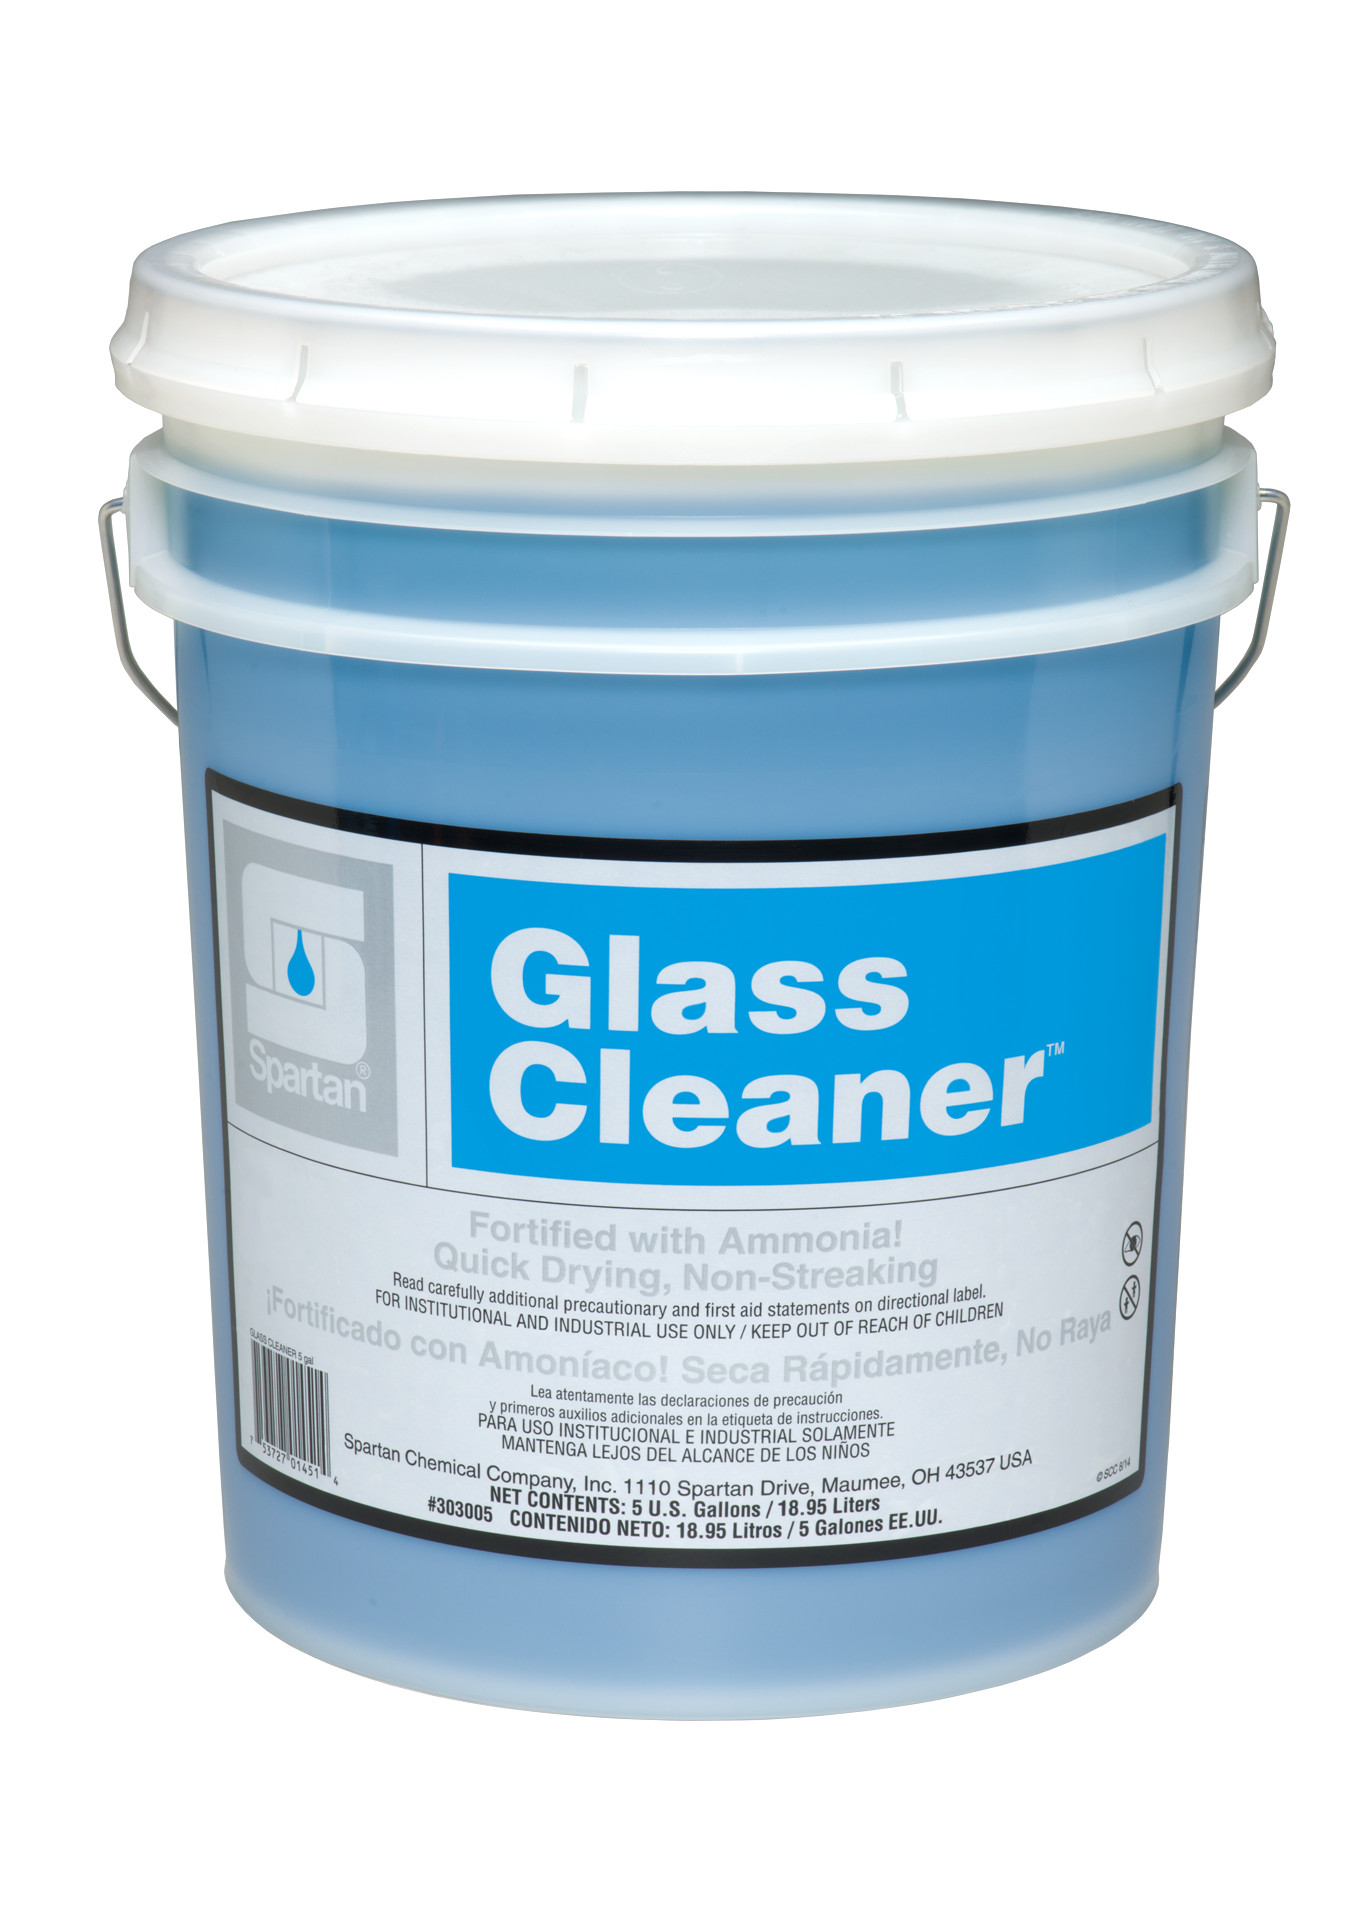 Spartan Chemical Company Glass Cleaner, 5 GAL PAIL